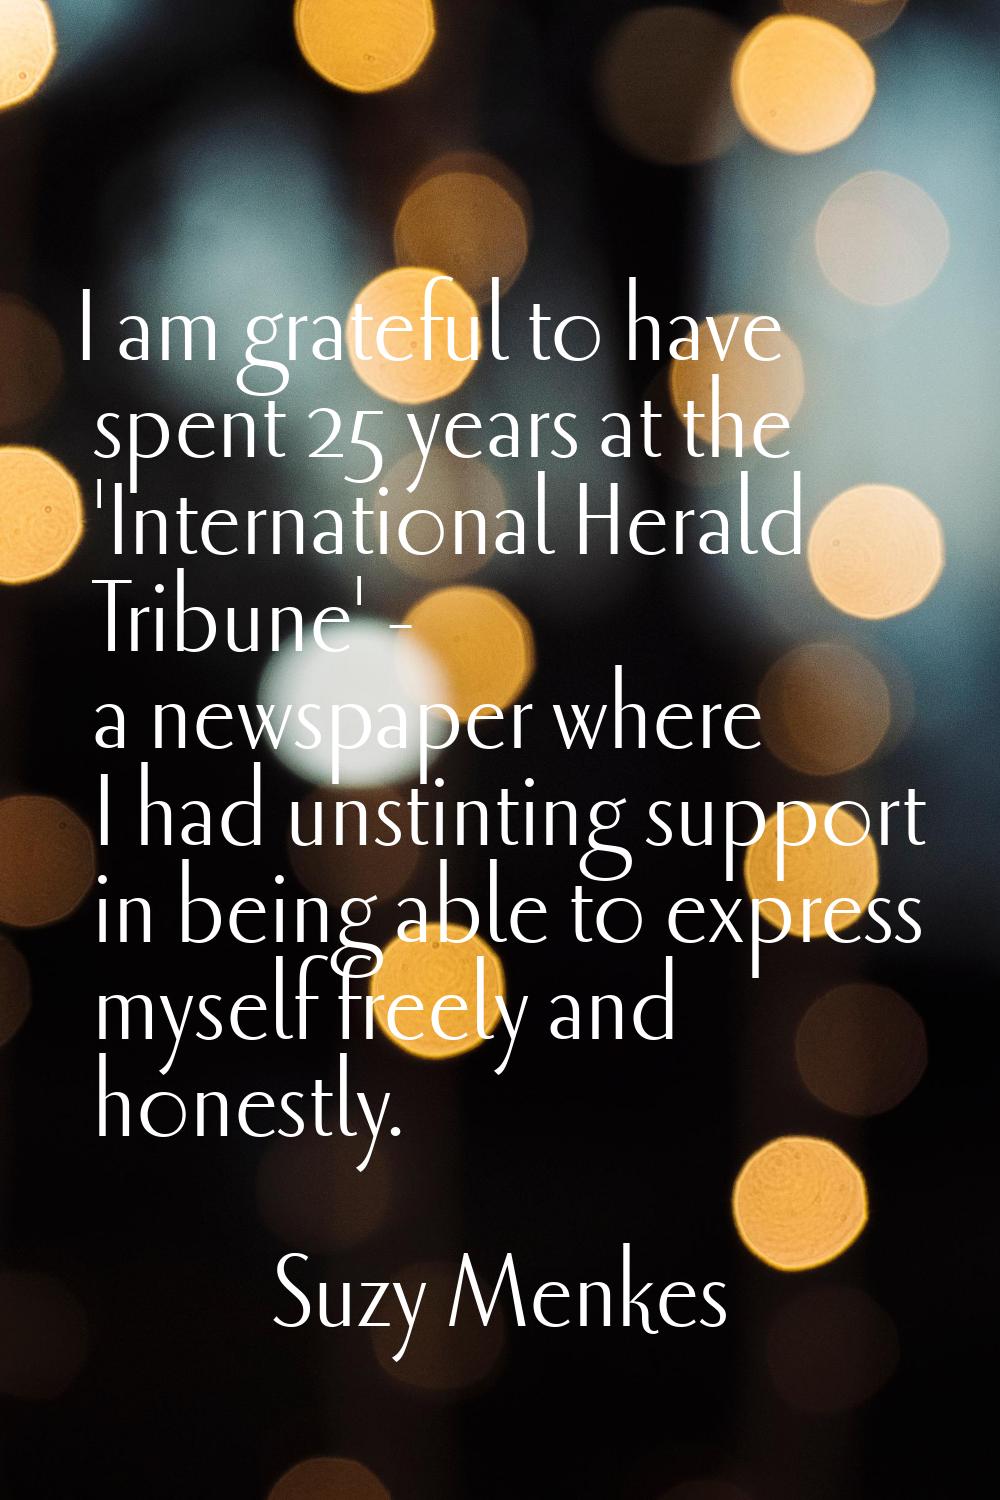 I am grateful to have spent 25 years at the 'International Herald Tribune' - a newspaper where I ha